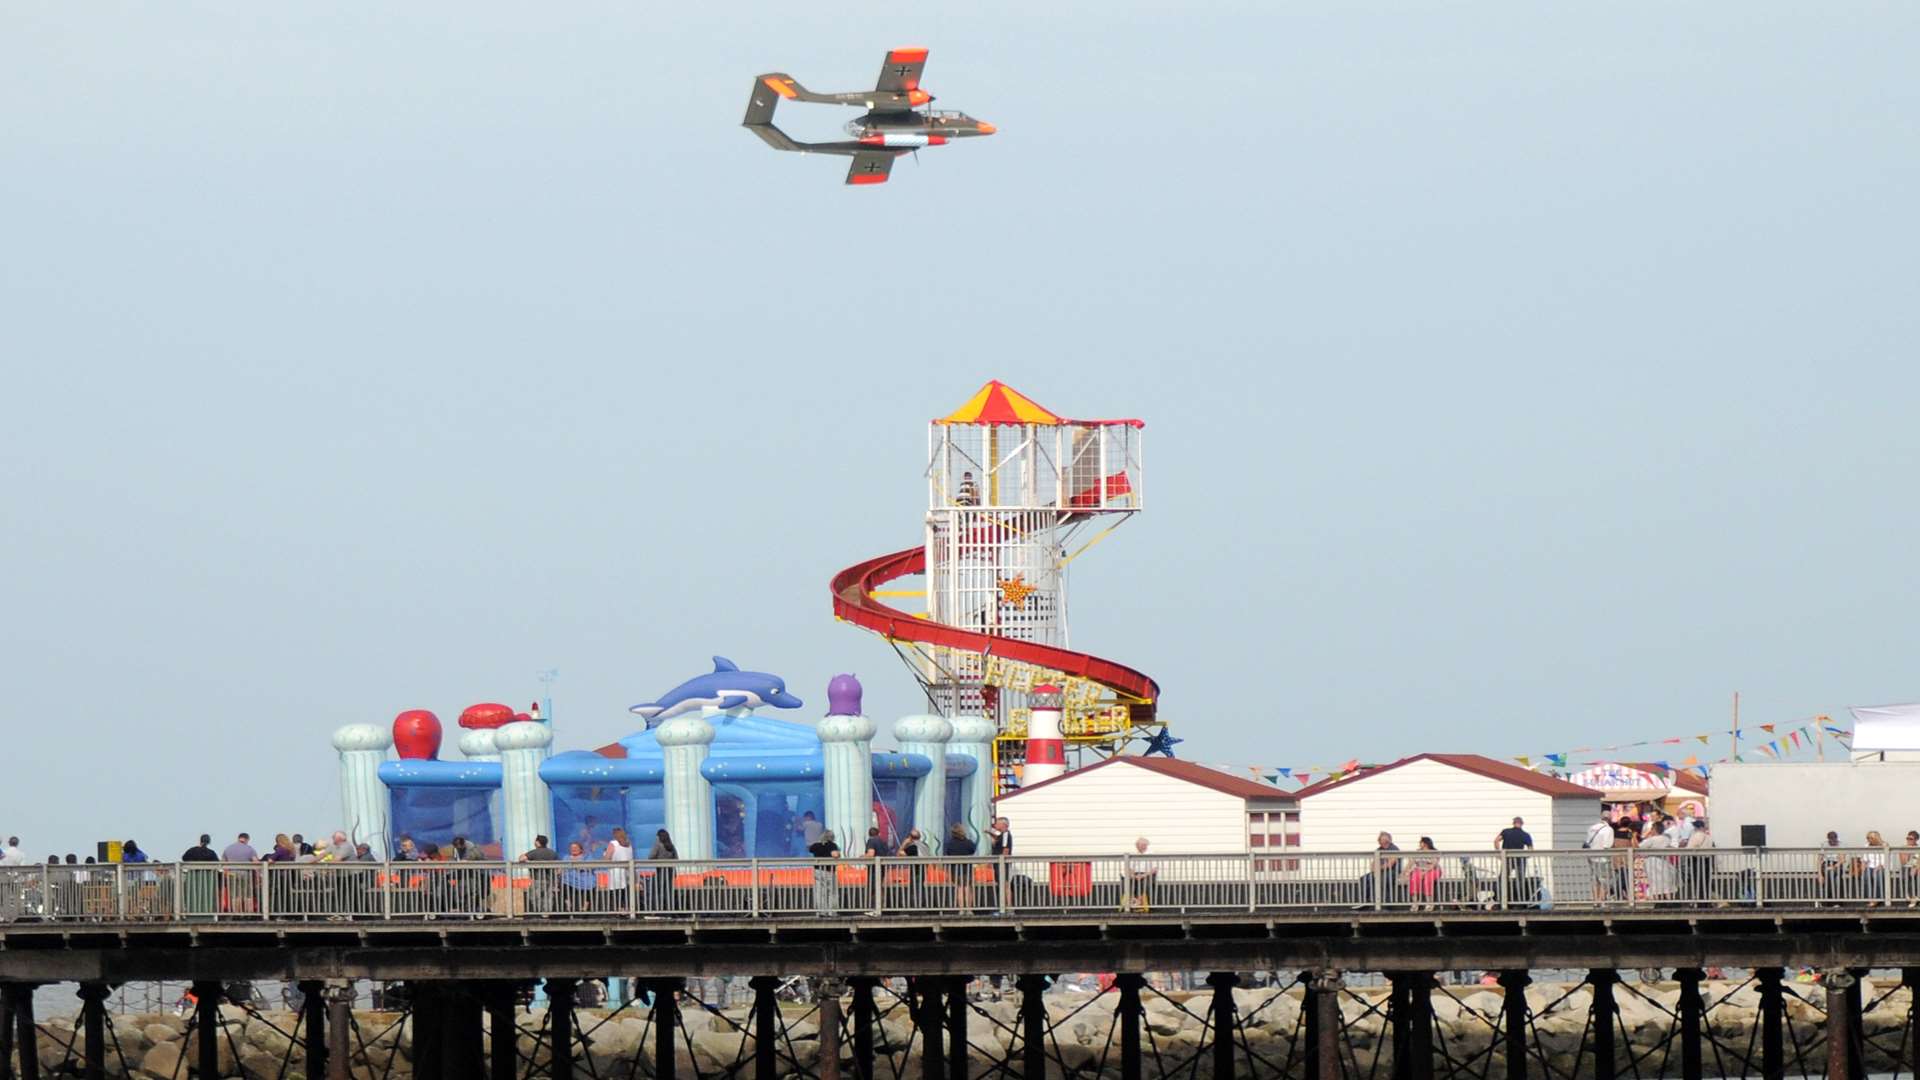 The air show at Herne Bay